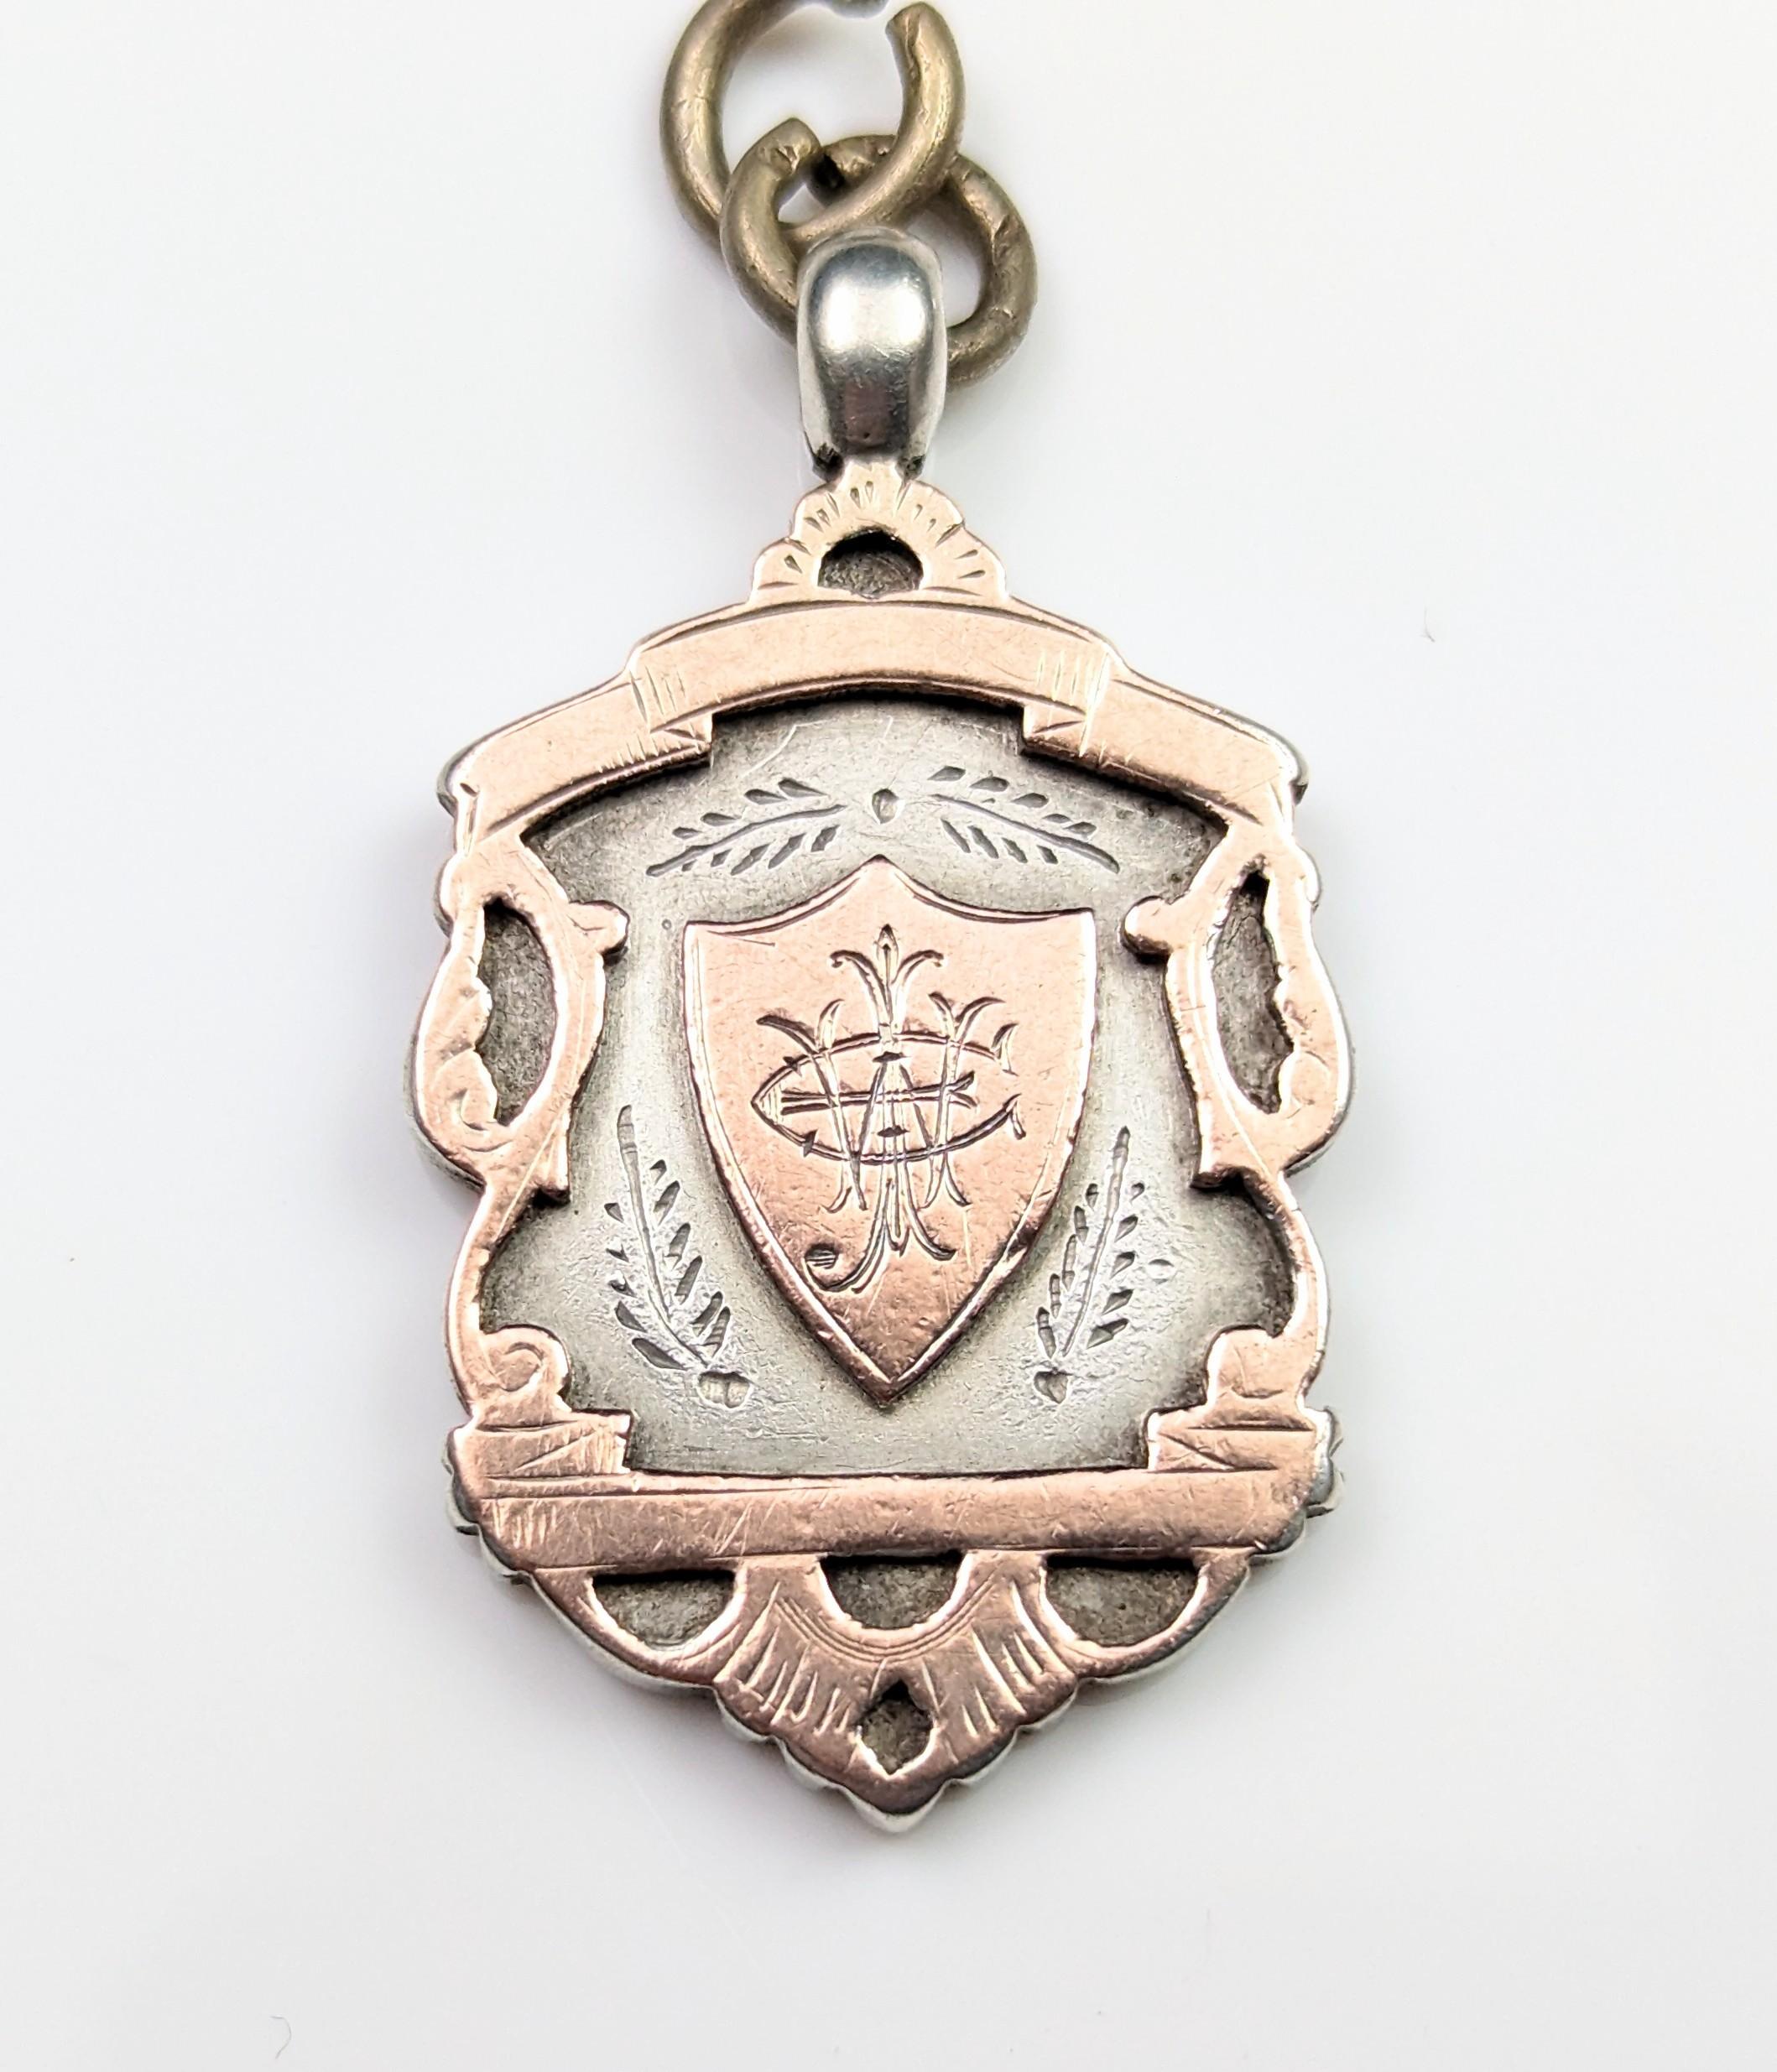 Antique shield fob pendant,  silver and 9k rose gold, Edwardian  6